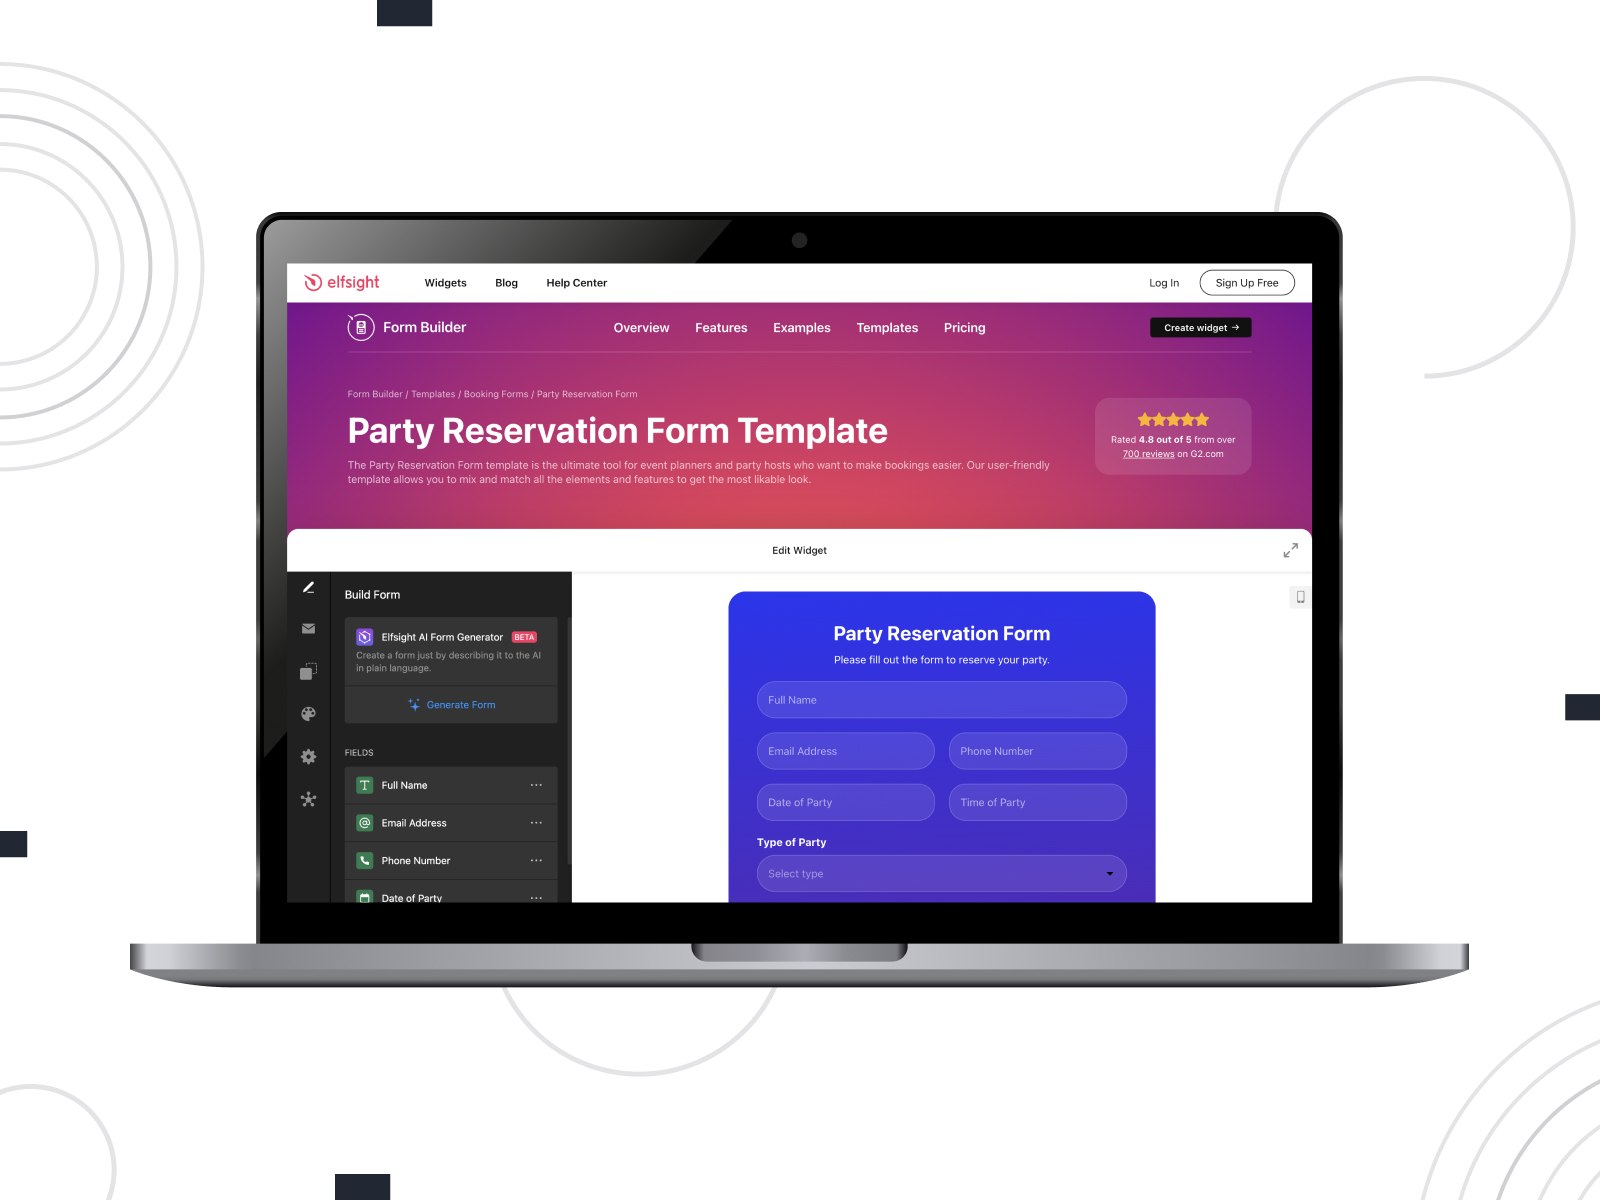 Image of party reservation form template by Elfsight.